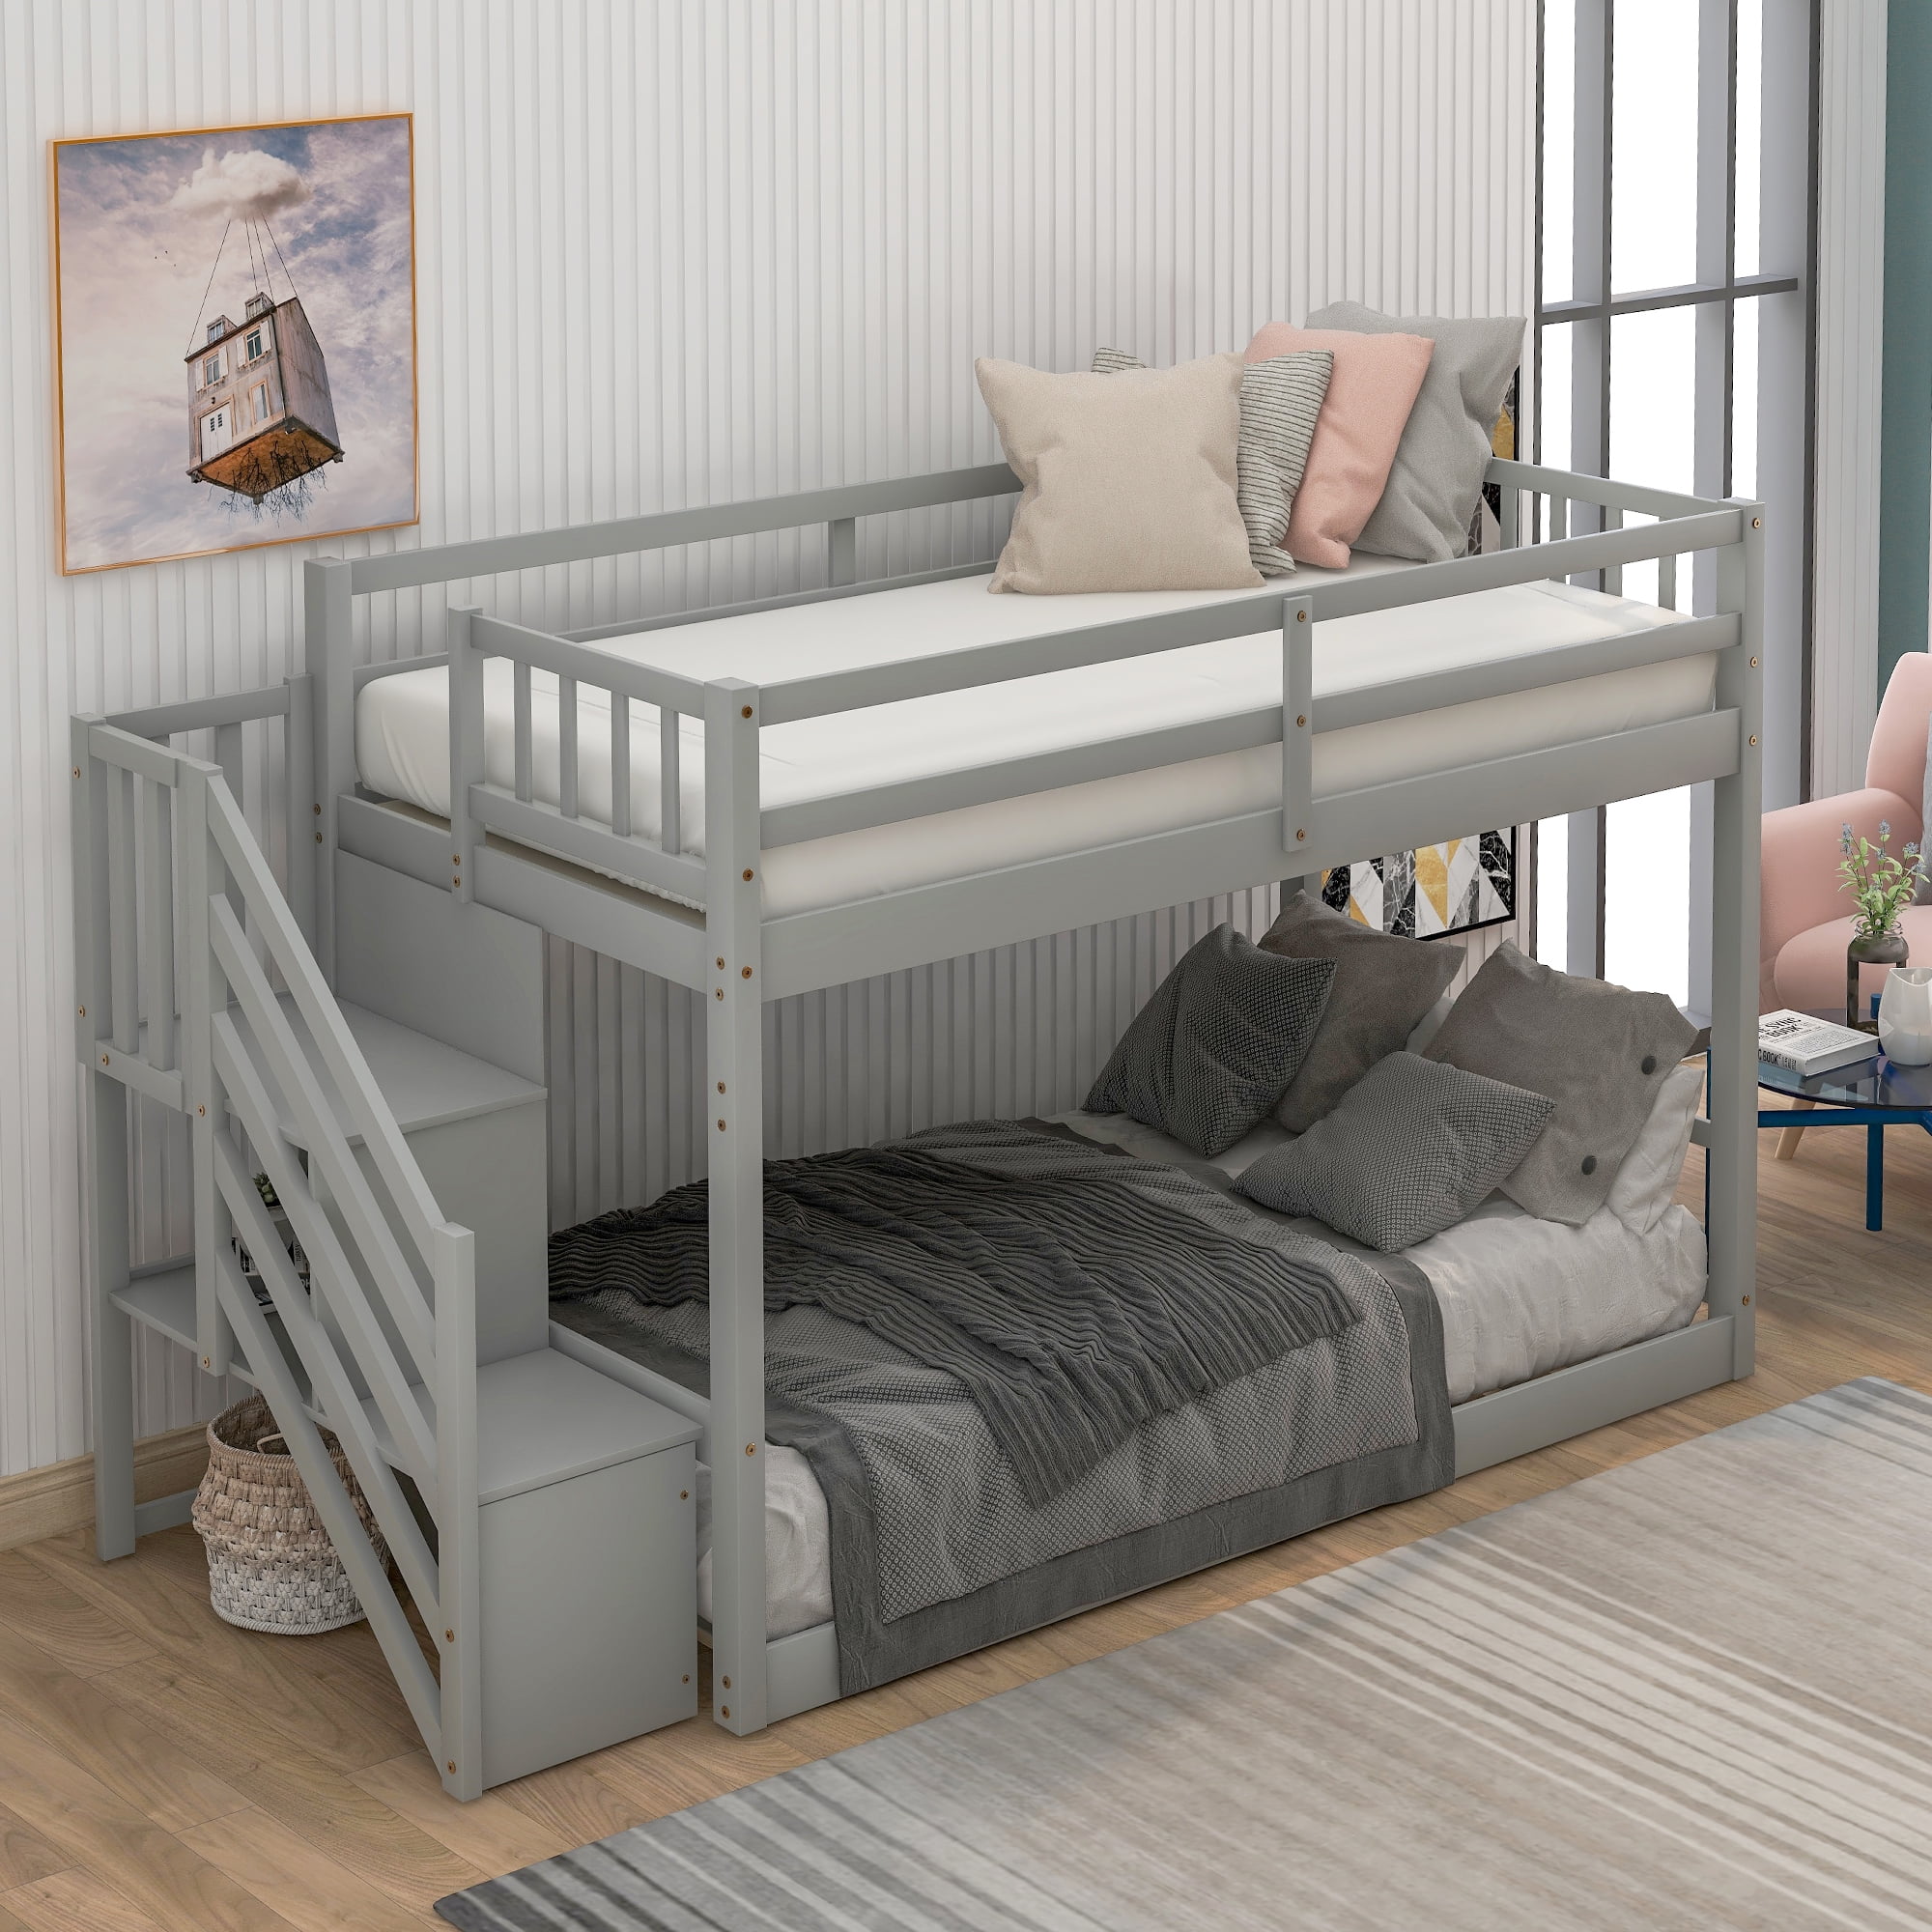 Euroco Wood Twin Over Floor Bunk, Twin Size Bunk Beds With Stairs